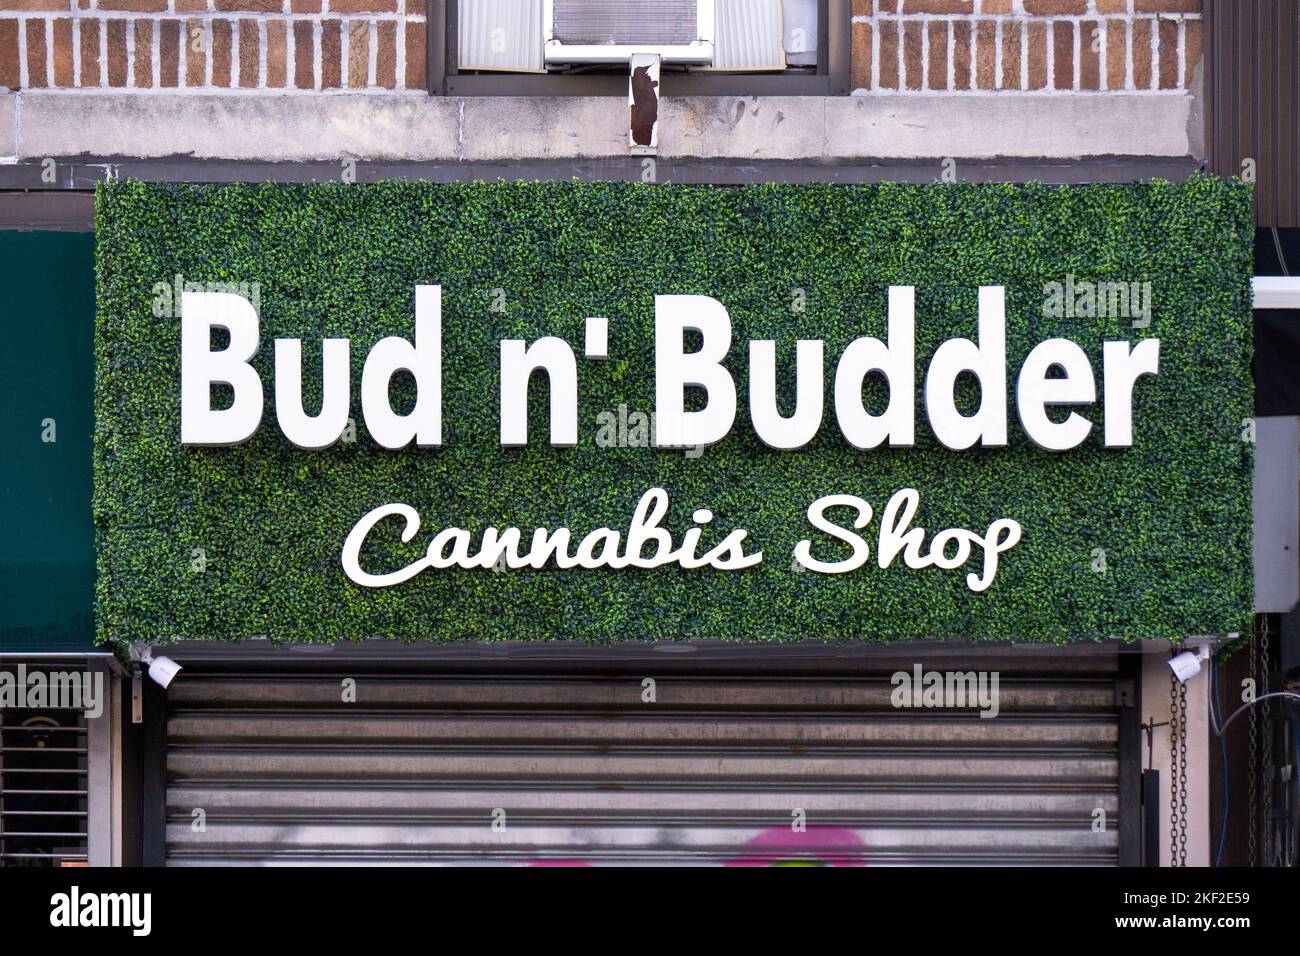 The exterior of Bud n' Budder a cannabis shop on Broadway in Astoria, queens, New York. Stock Photo